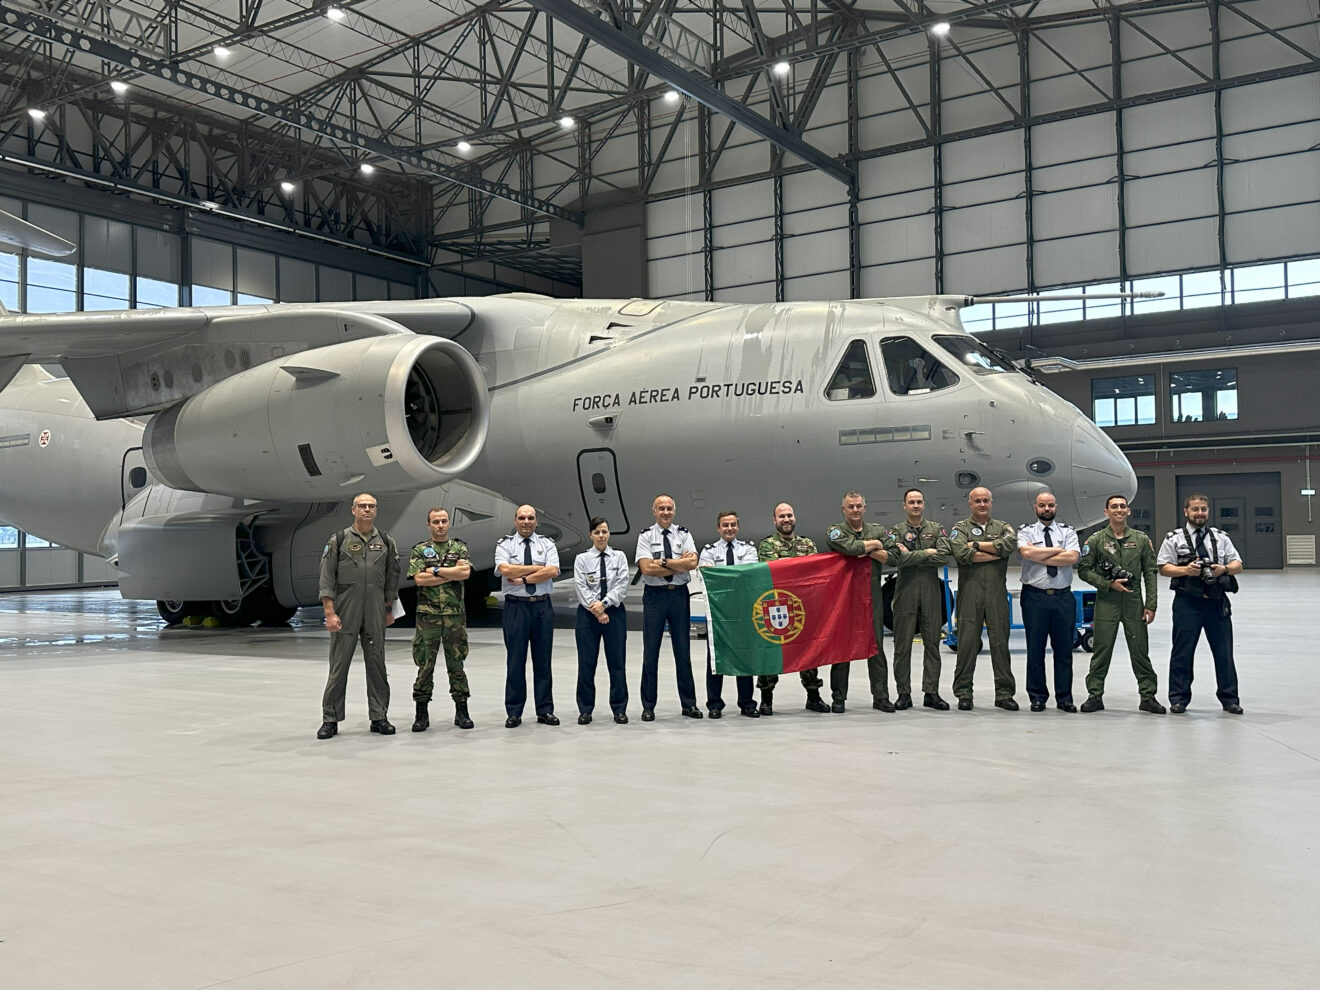 The first KC-390 Millenium aircraft has entered into service with the Portuguese Air Force